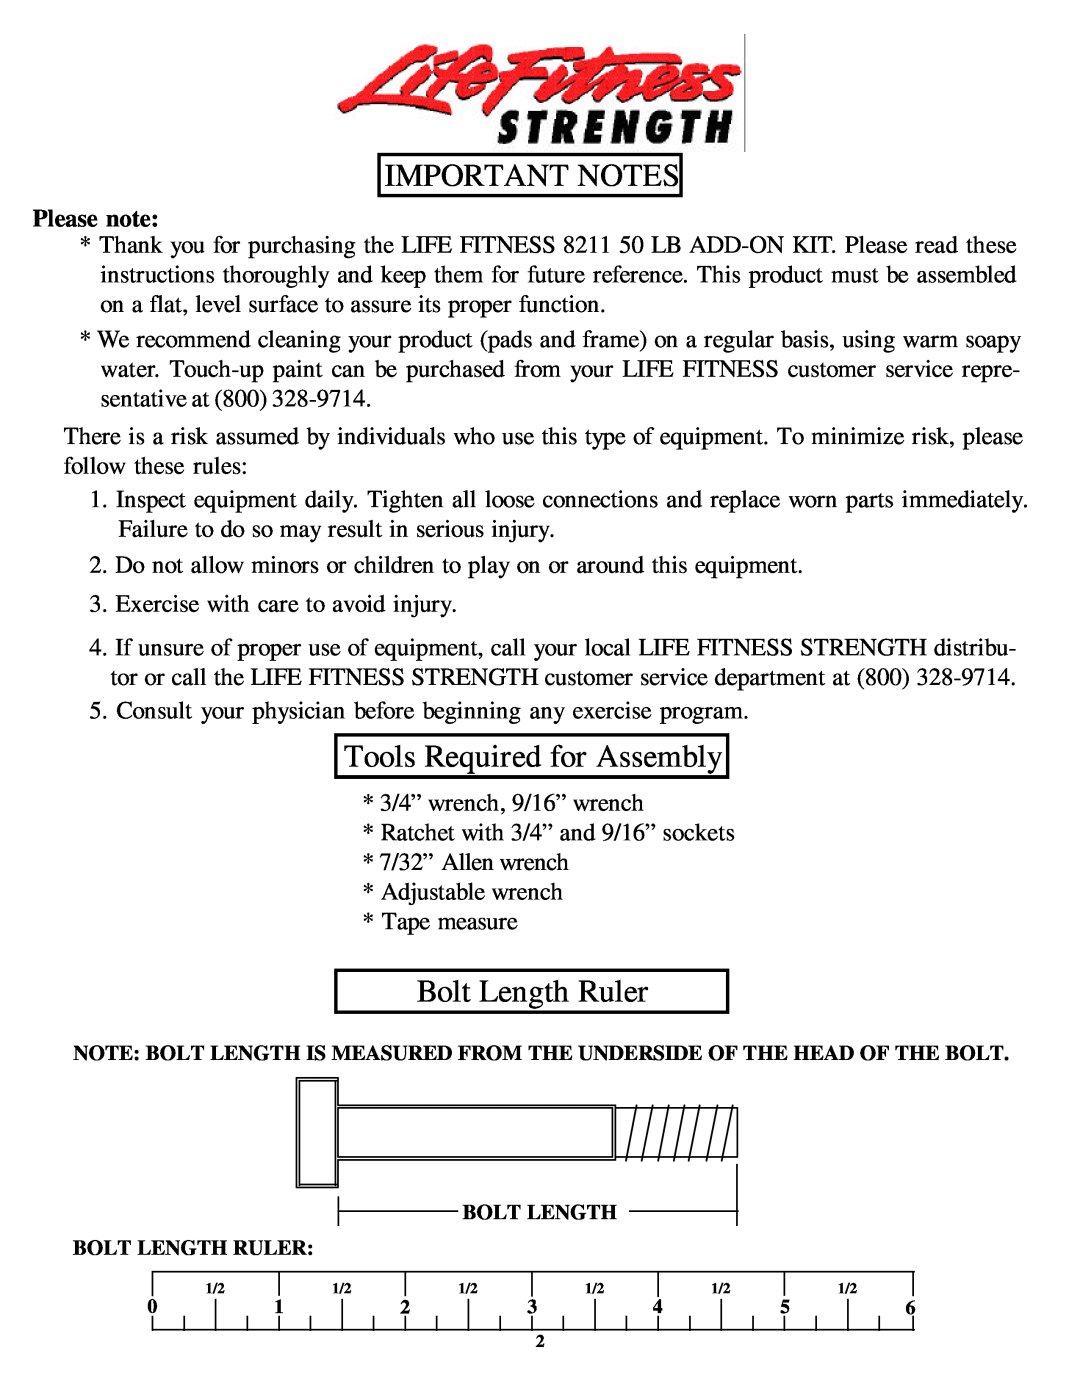 Life Fitness 8211 manual Tools Required for Assembly, Bolt Length Ruler, Please note 